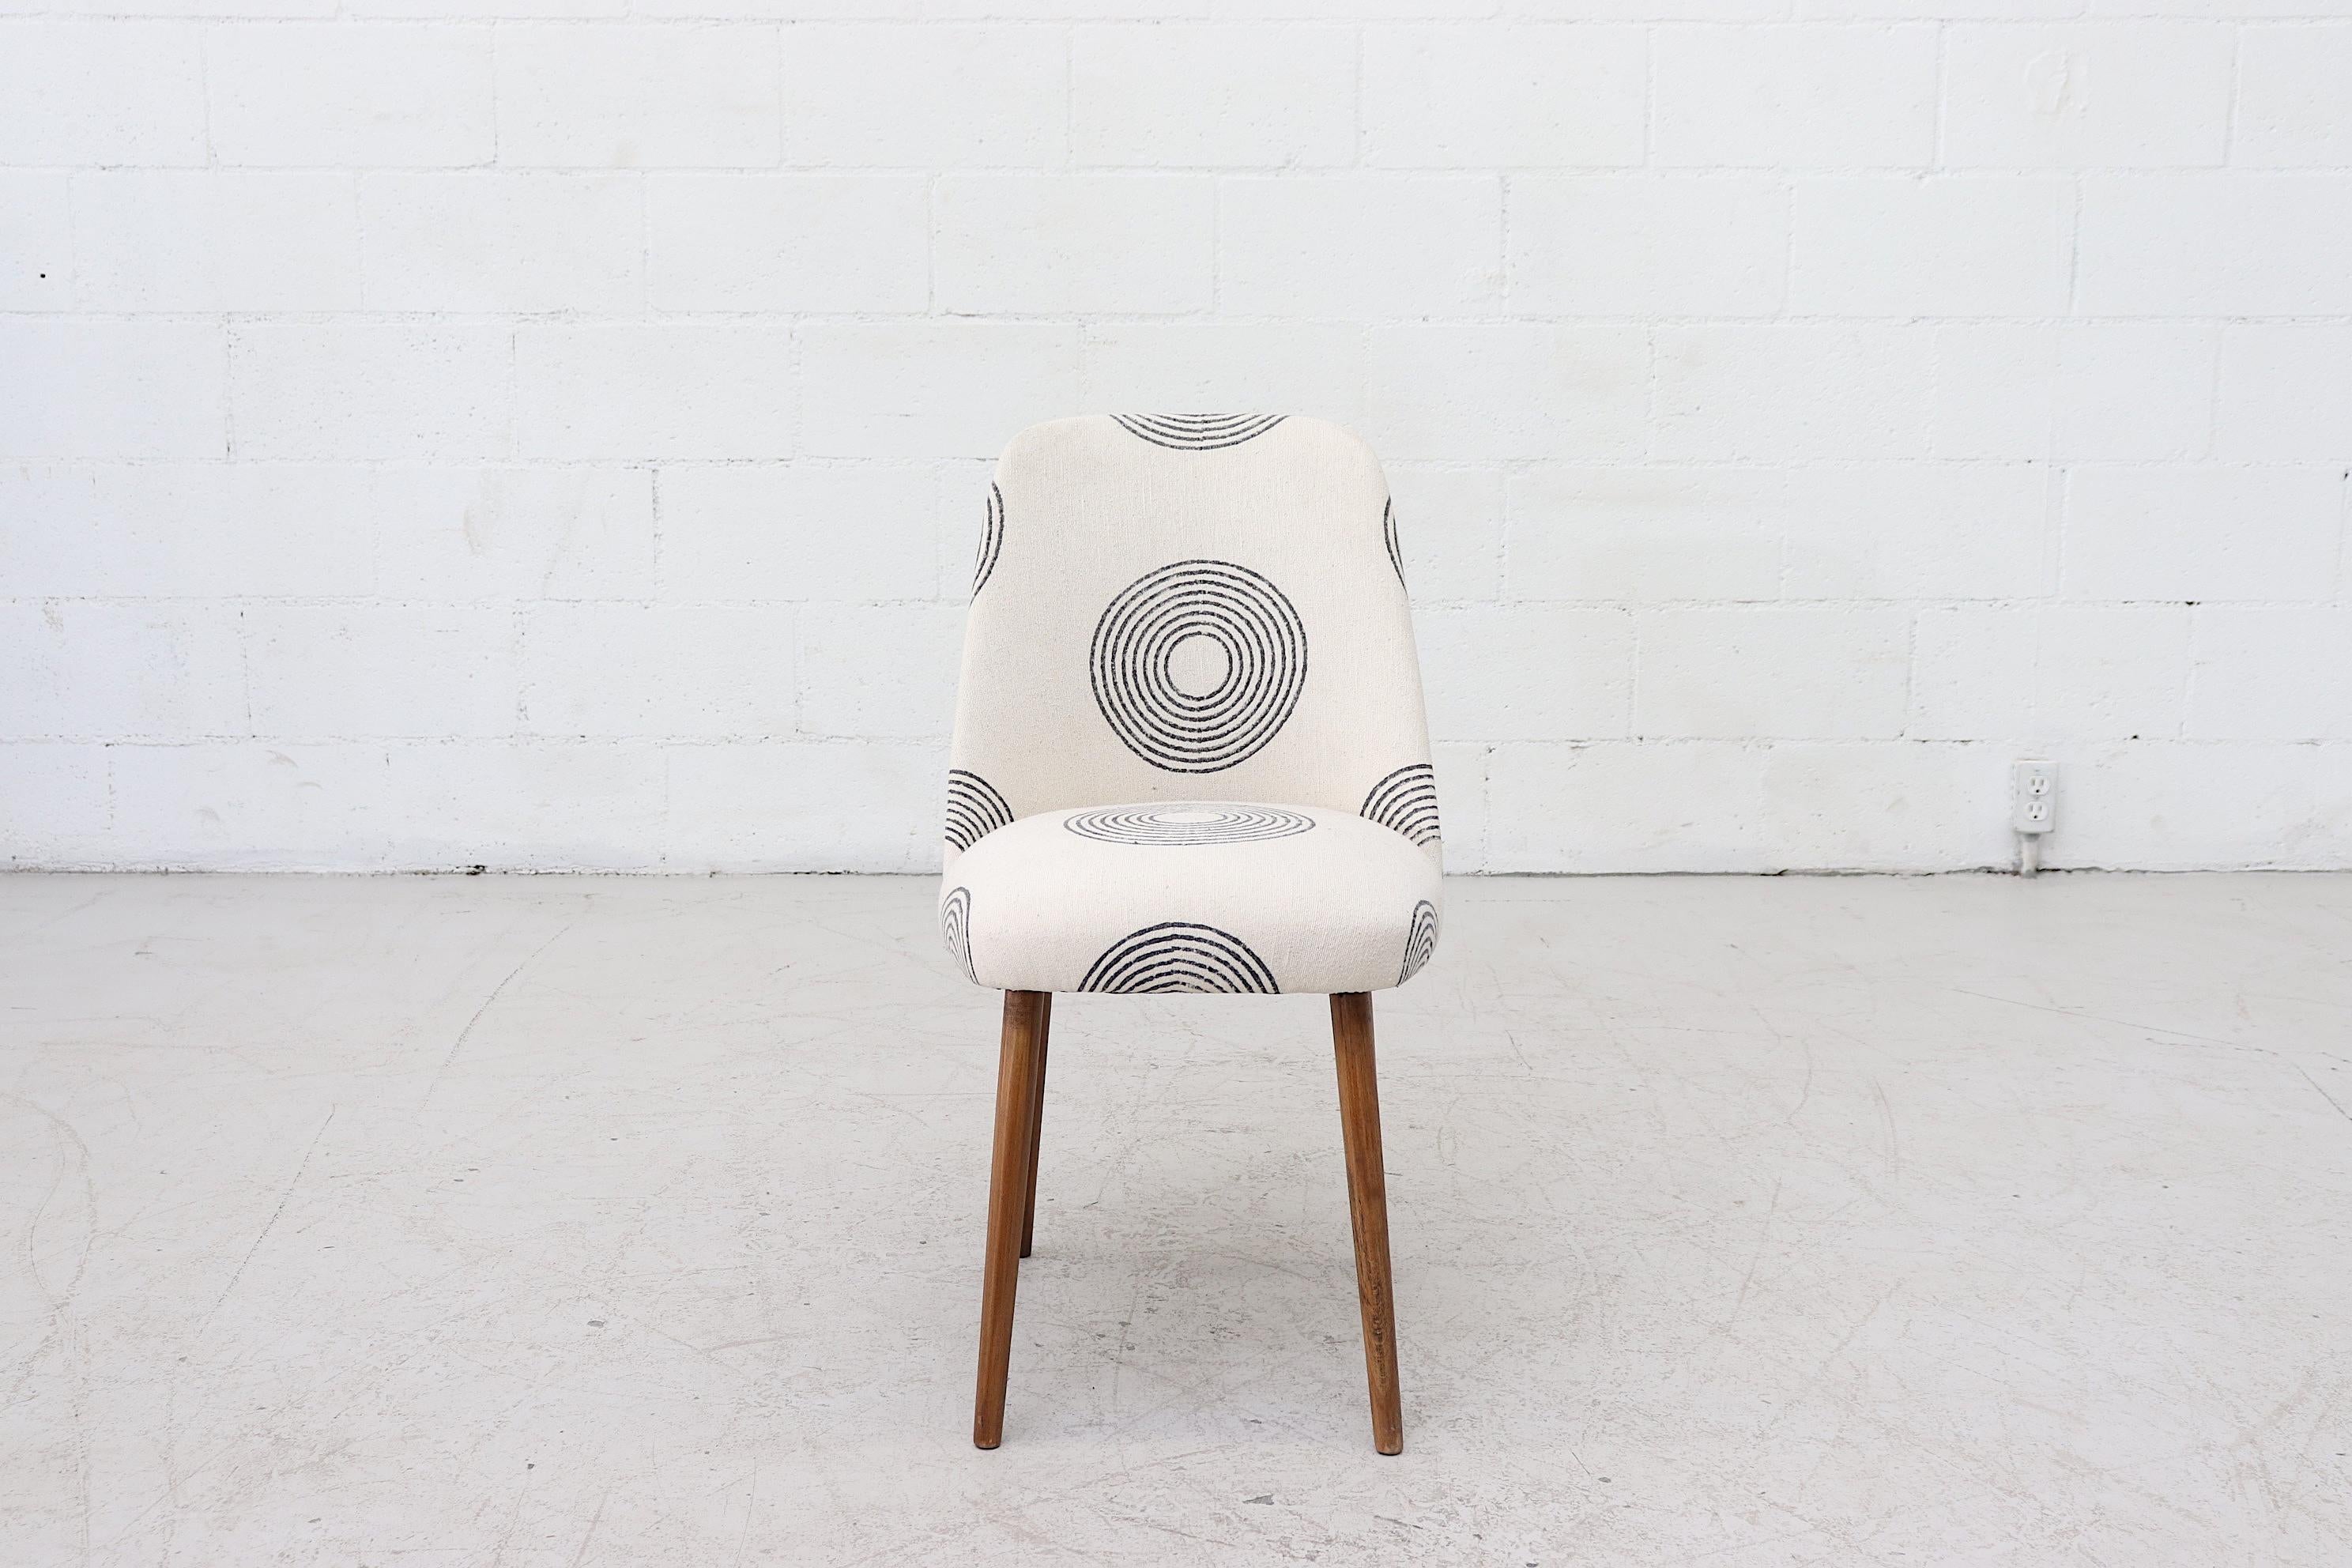 Amsterdam Modern and Los Angeles Textile Studio Block Shop collaborated on a Classic Saarinen-style cocktail chair. Beautifully restored and newly upholstered in custom bone white textured Khadi Indian cotton with hand block print and lightly